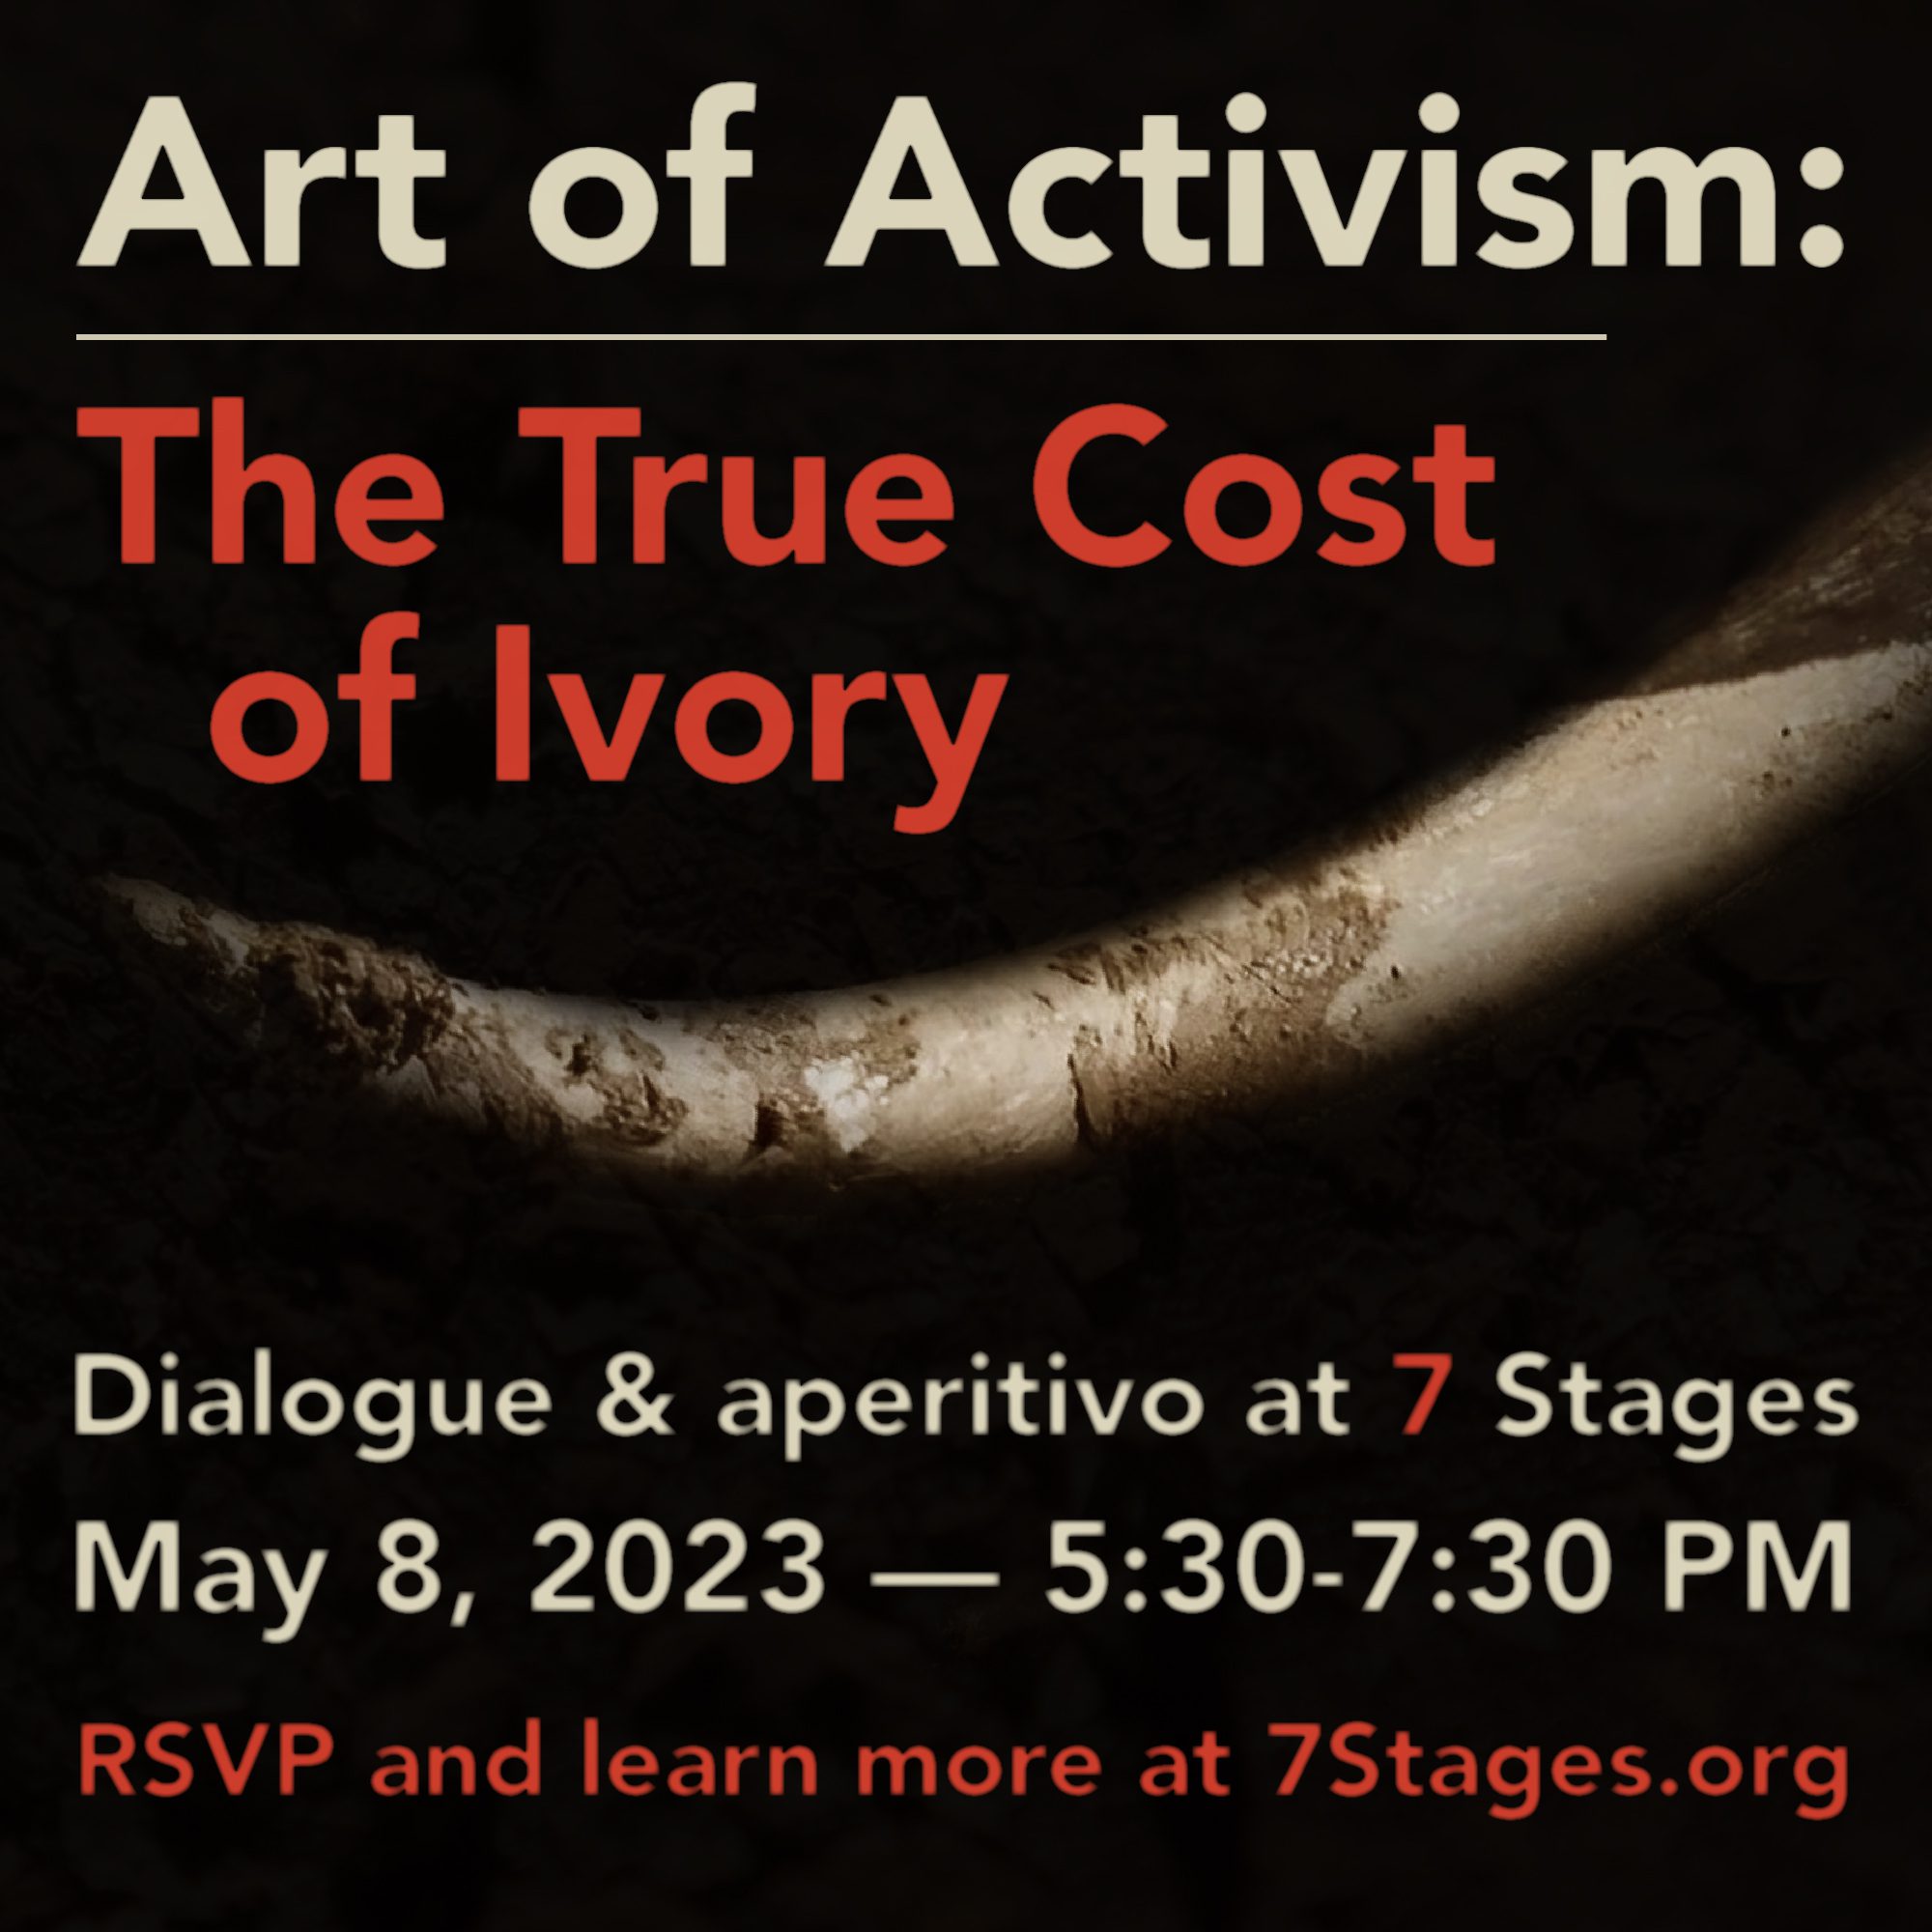 Art of Activism: The True Cost of Ivory. Dialogue and aperitivo at 7 Stages. May 8, 2023 from 5:30 to 7:30 PM. RSVP and learn more at 7stages.org